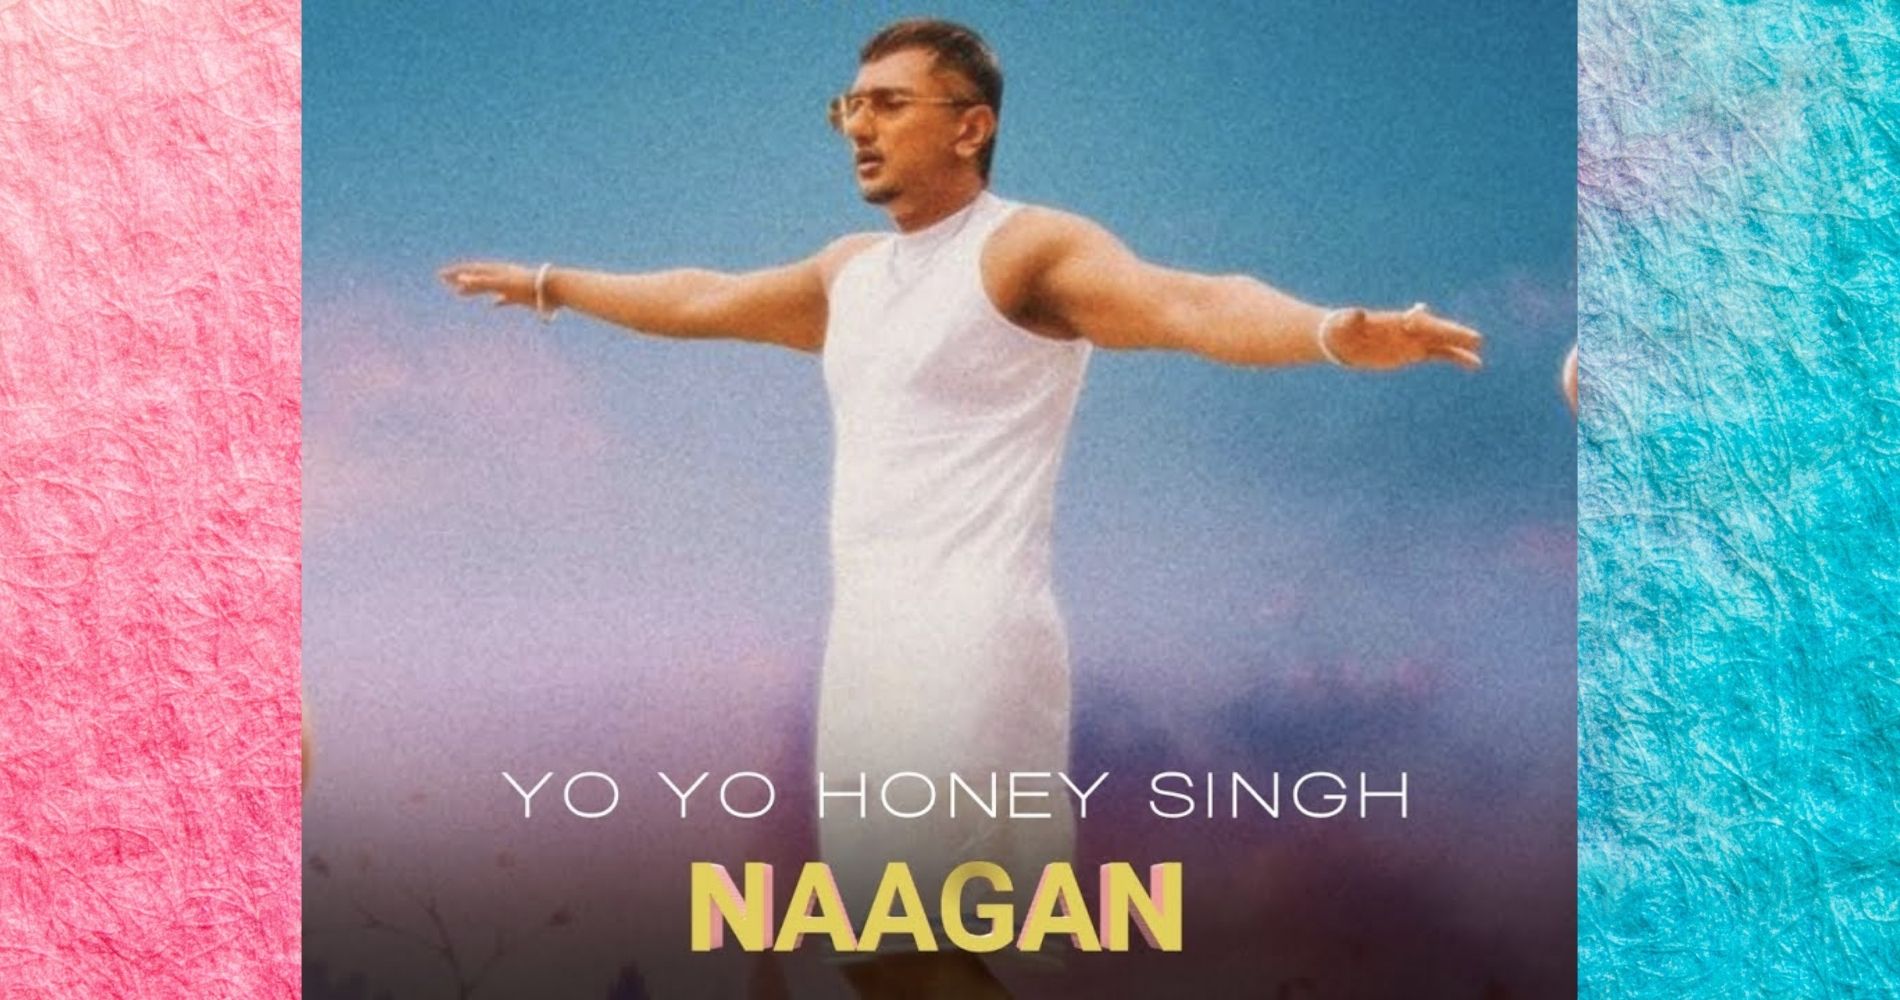 Honey Singh Takes a Desi Turn with New Track 'Naagan'